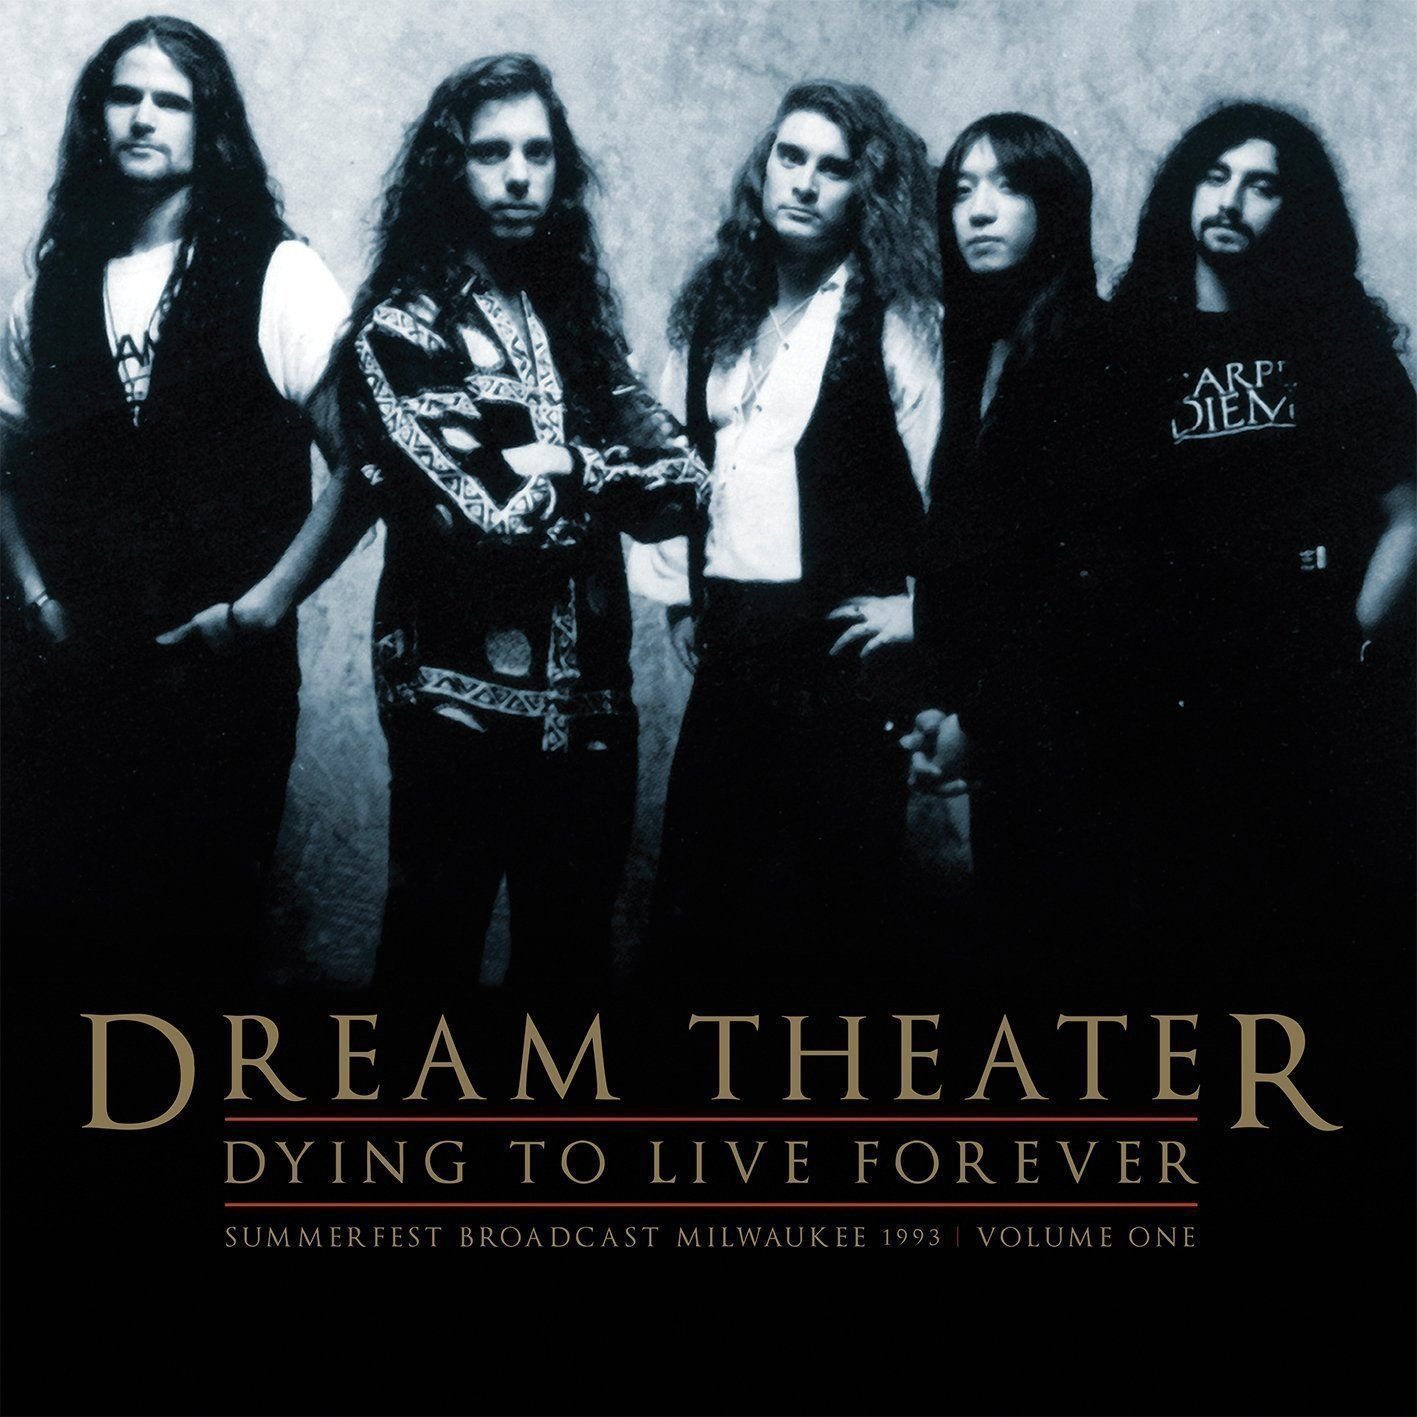 Schallplatte Dream Theater - Dying To Live Forever - Milwaukee 1993 Vol. 1 (2 LP)